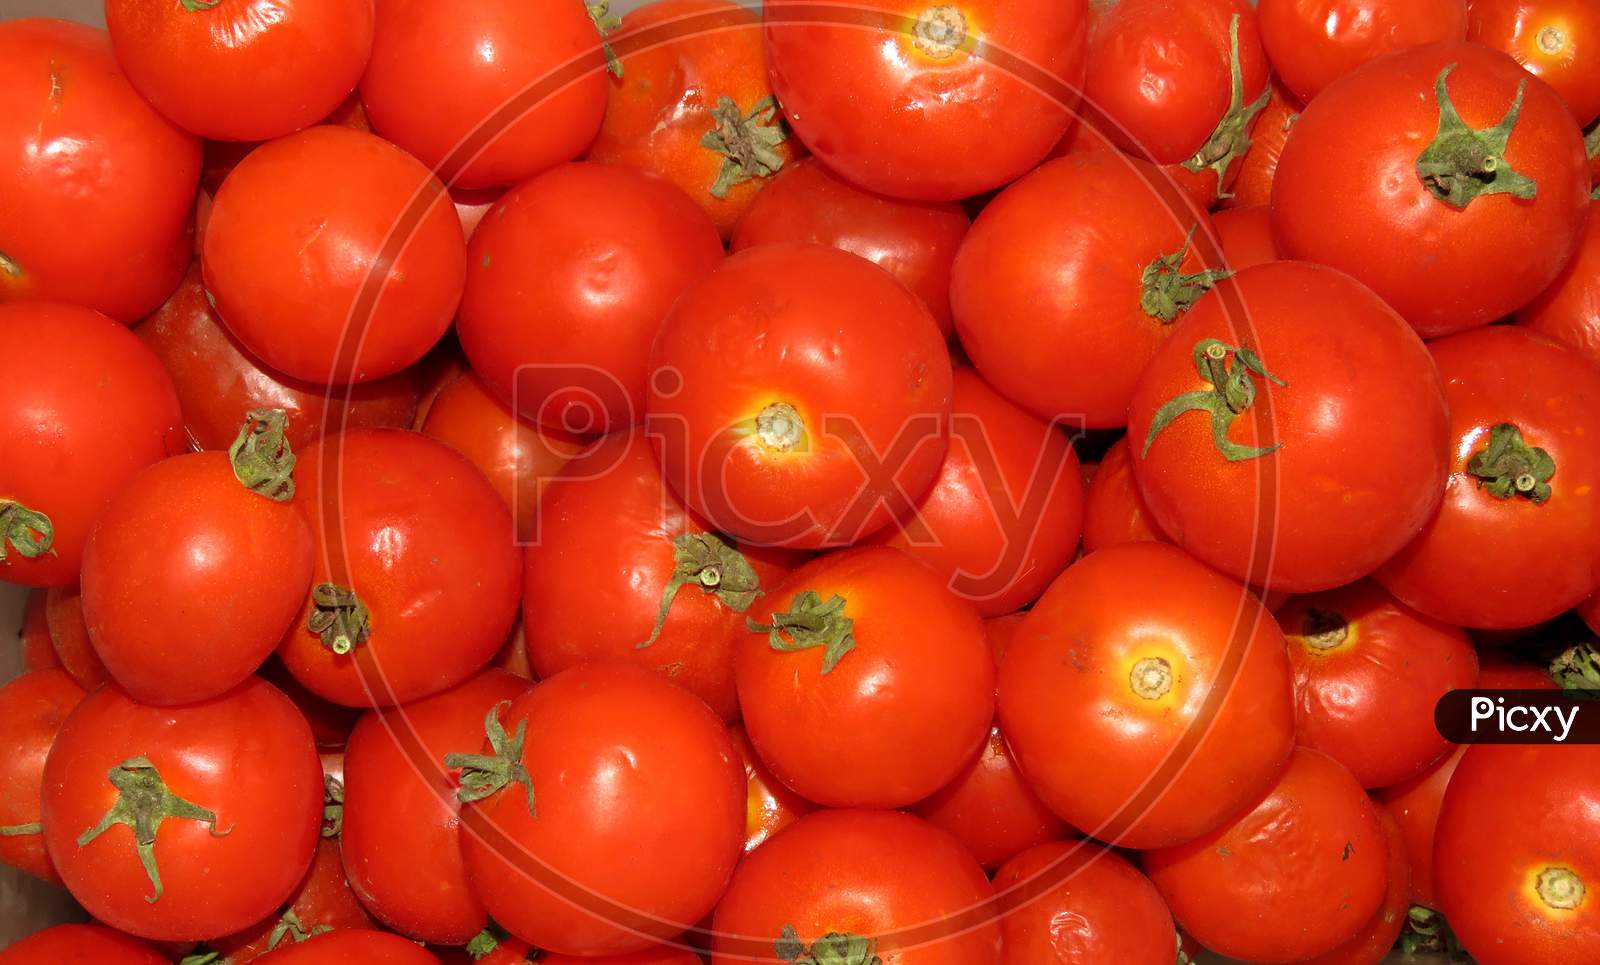 Tomatoes on Market,Fresh Tomatoes for Sale.Isolated Tomatoes.